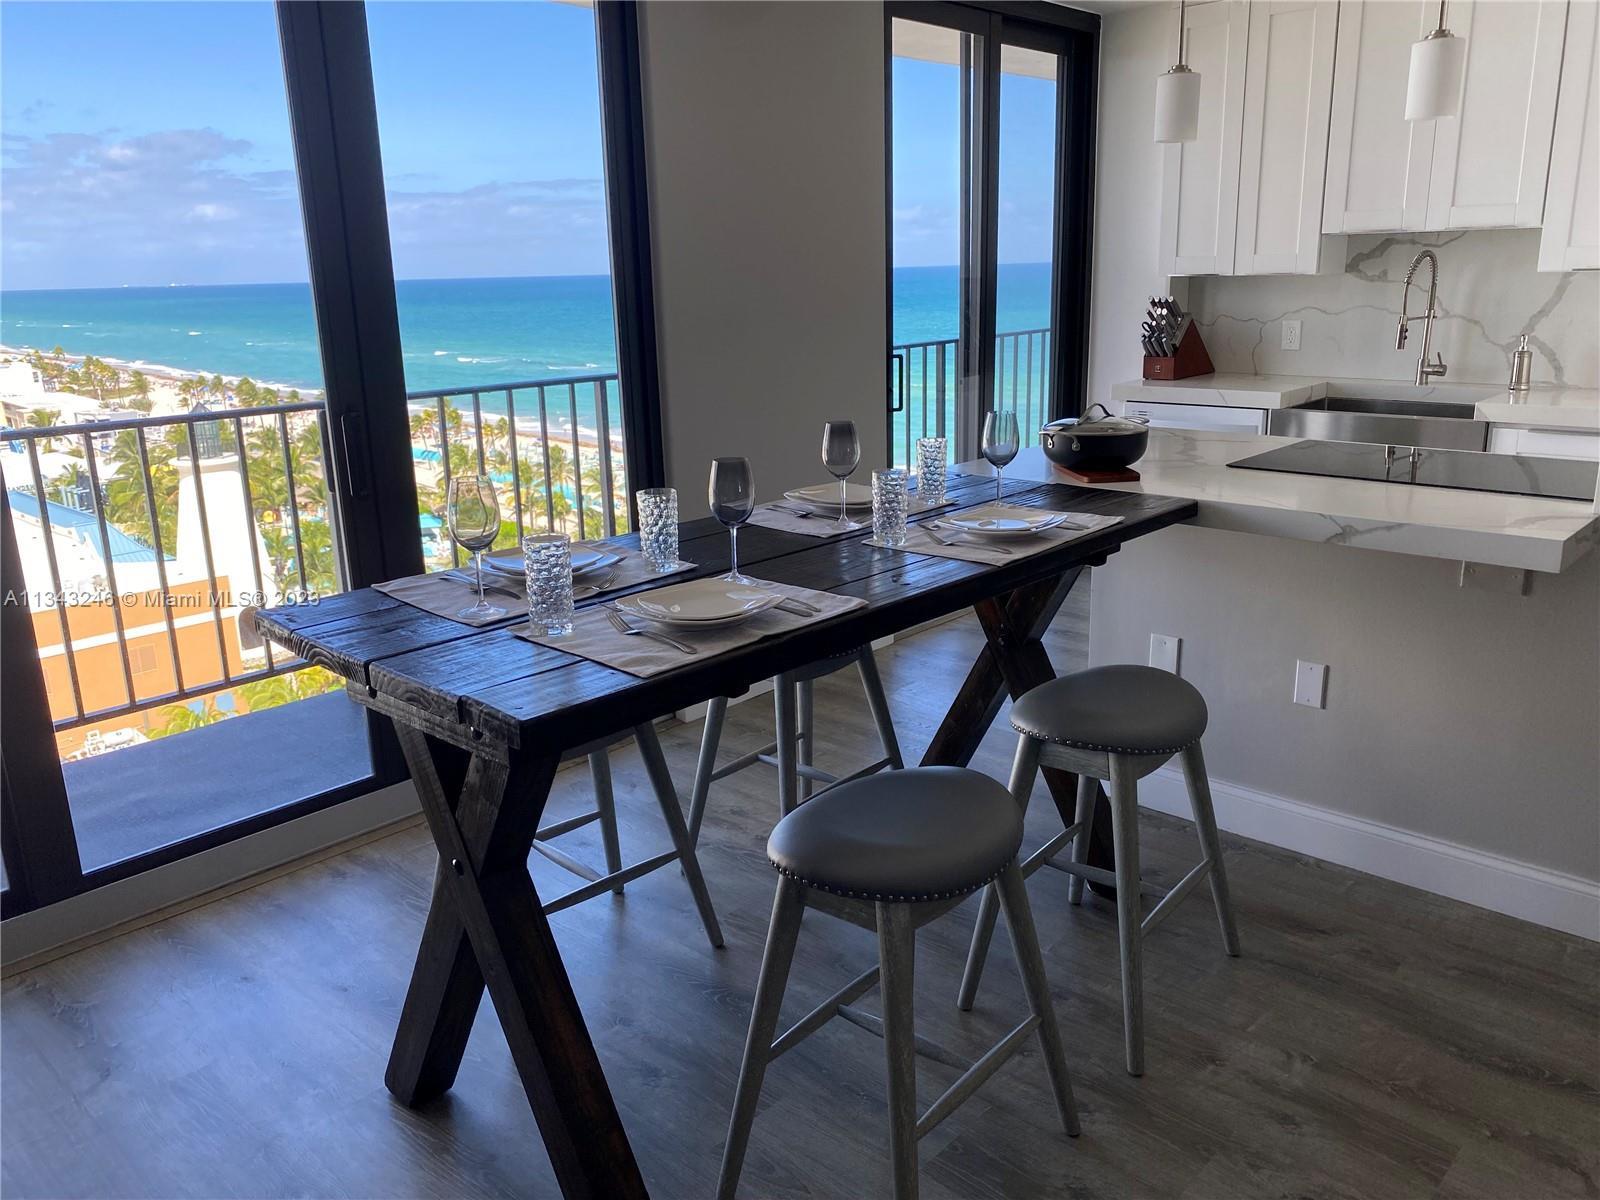 THIS BEAUTIFUL NEWLY RENOVATED 1 BEDROOM, 1.5 BATH CONDO OFFERS A MILLION DOLLAR VIEW OF THE OCEAN A